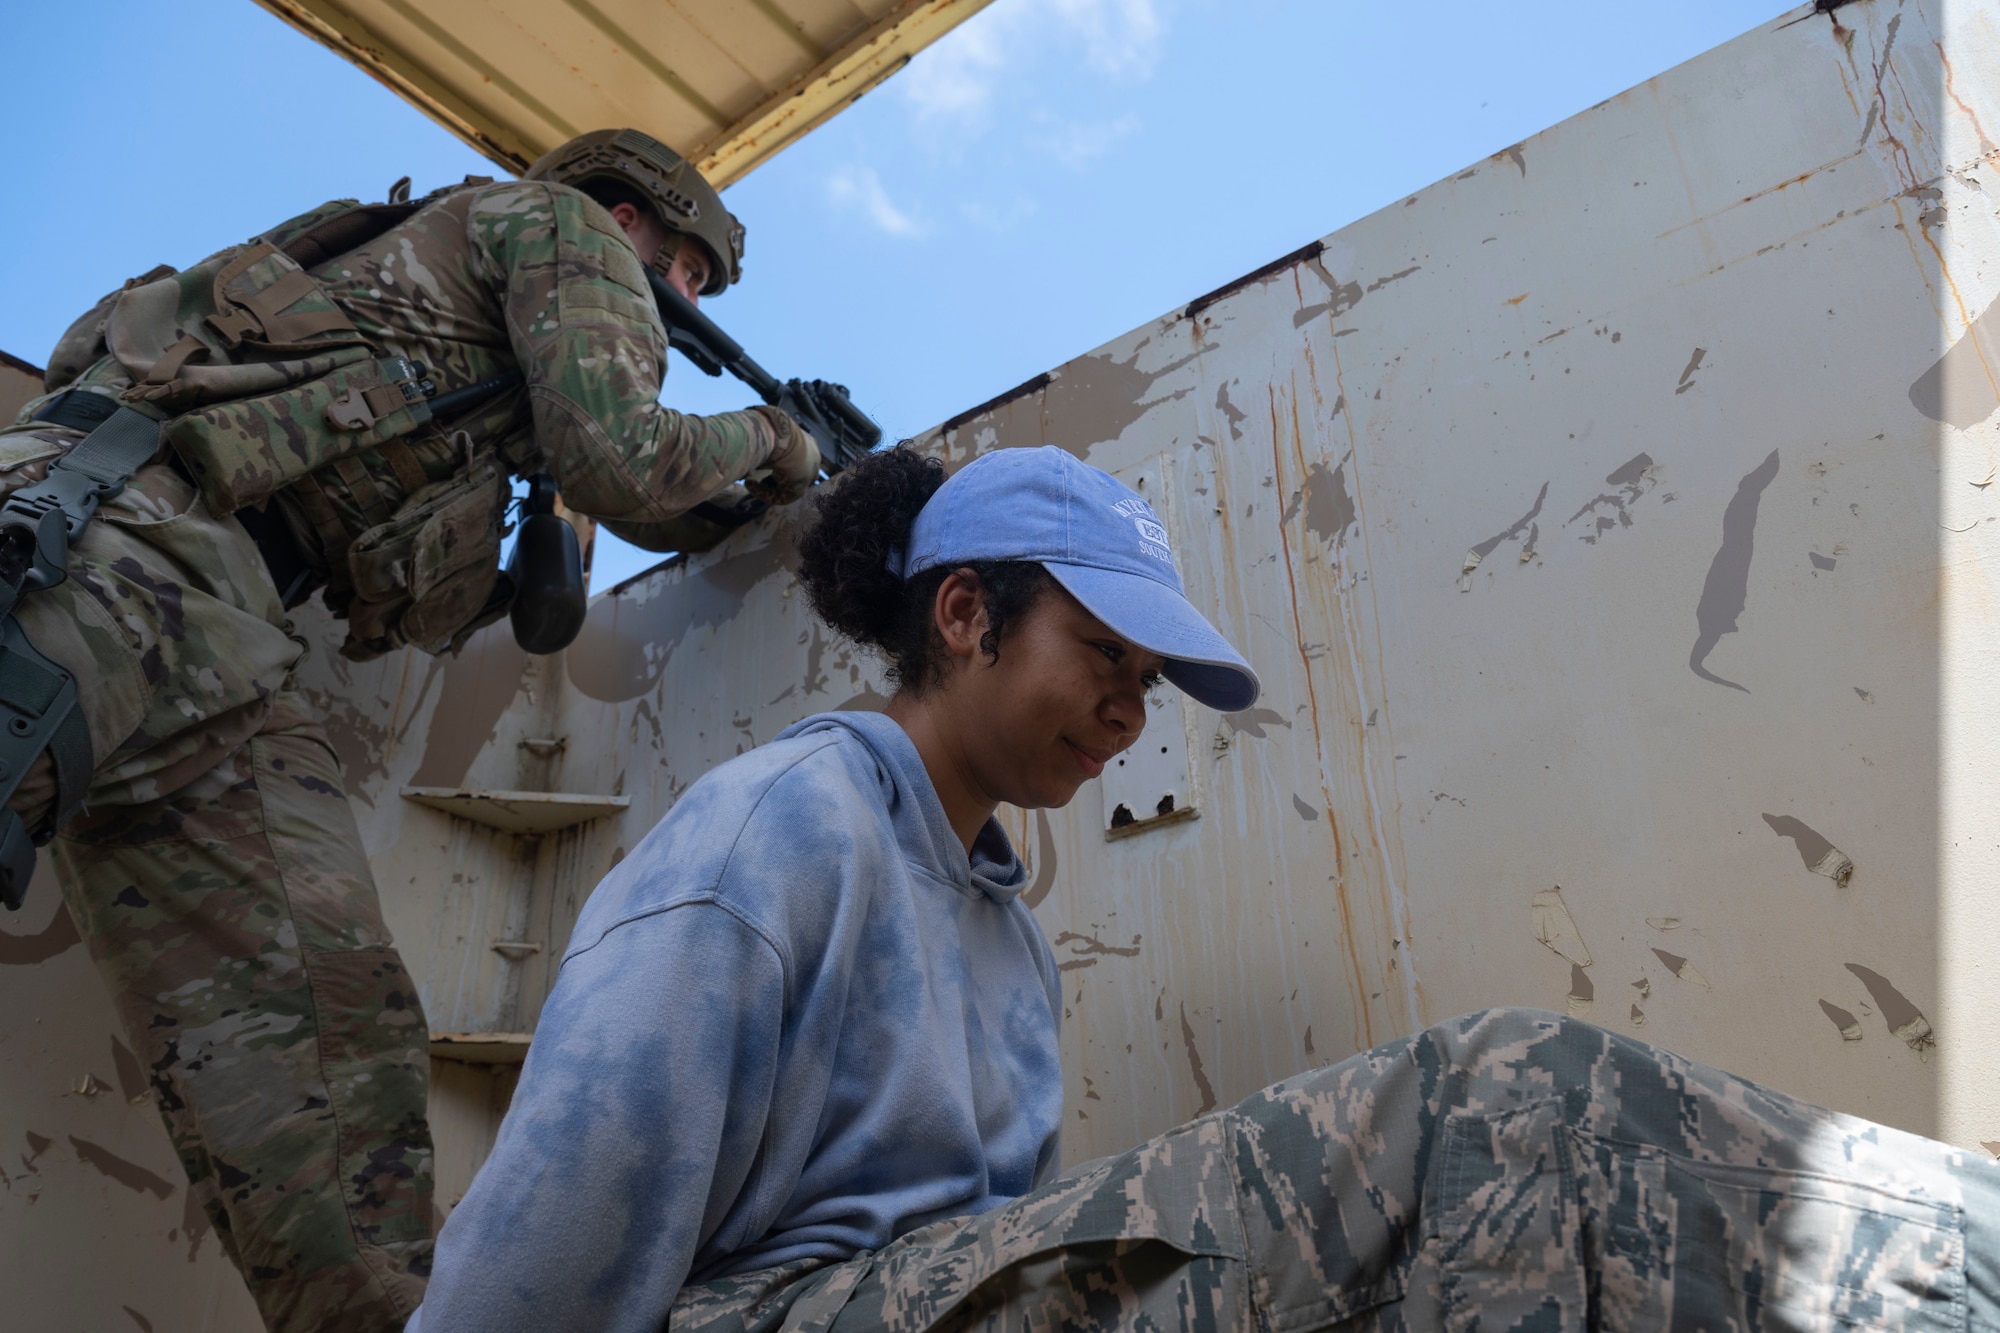 A U.S. Air Force Airman with the 736th Security Forces Squadron guards an opposing force volunteer after clearing a simulated base during a combat training course at Andersen Air Force Base, Guam, May 3, 2022.